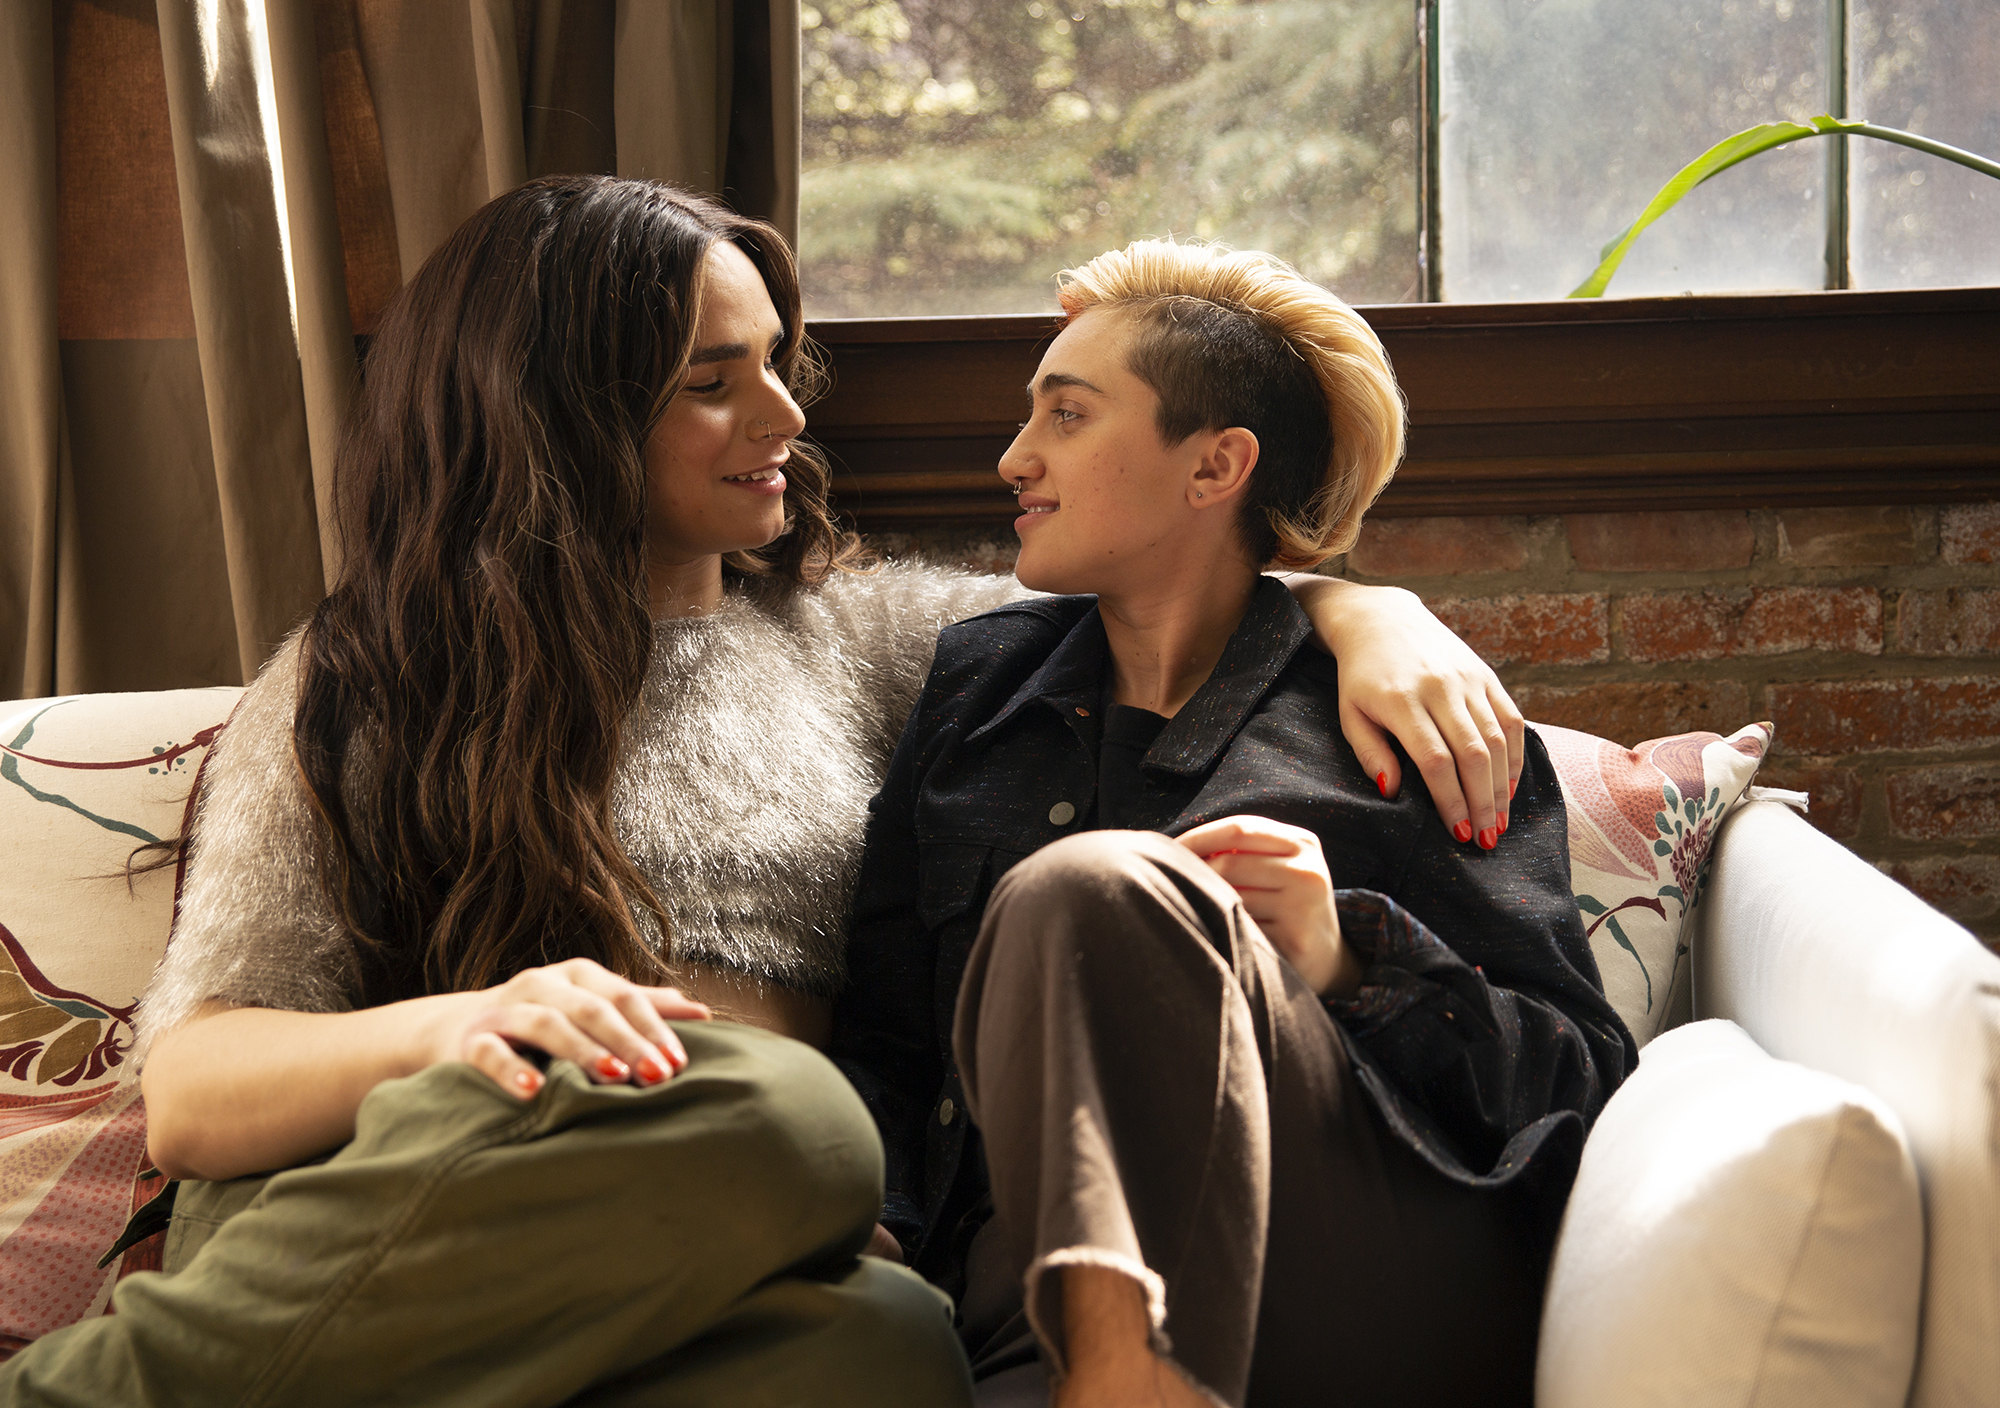 Photograph of queer couple sitting on couch looking at each other.